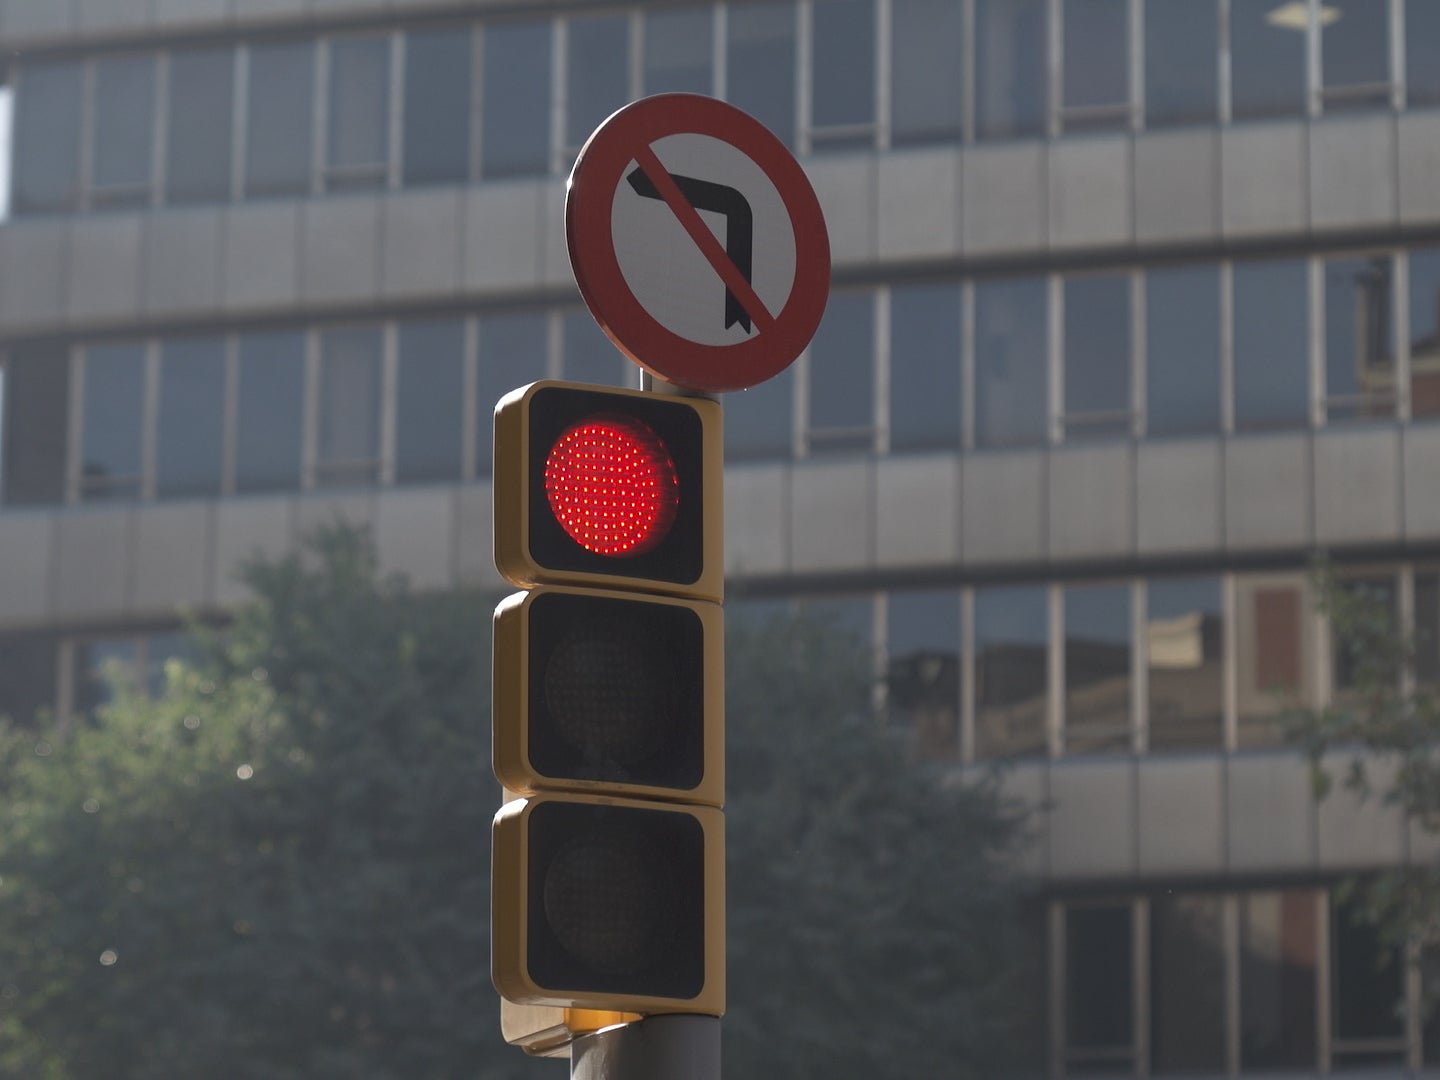 New trial explores how traffic lights and cars can interact